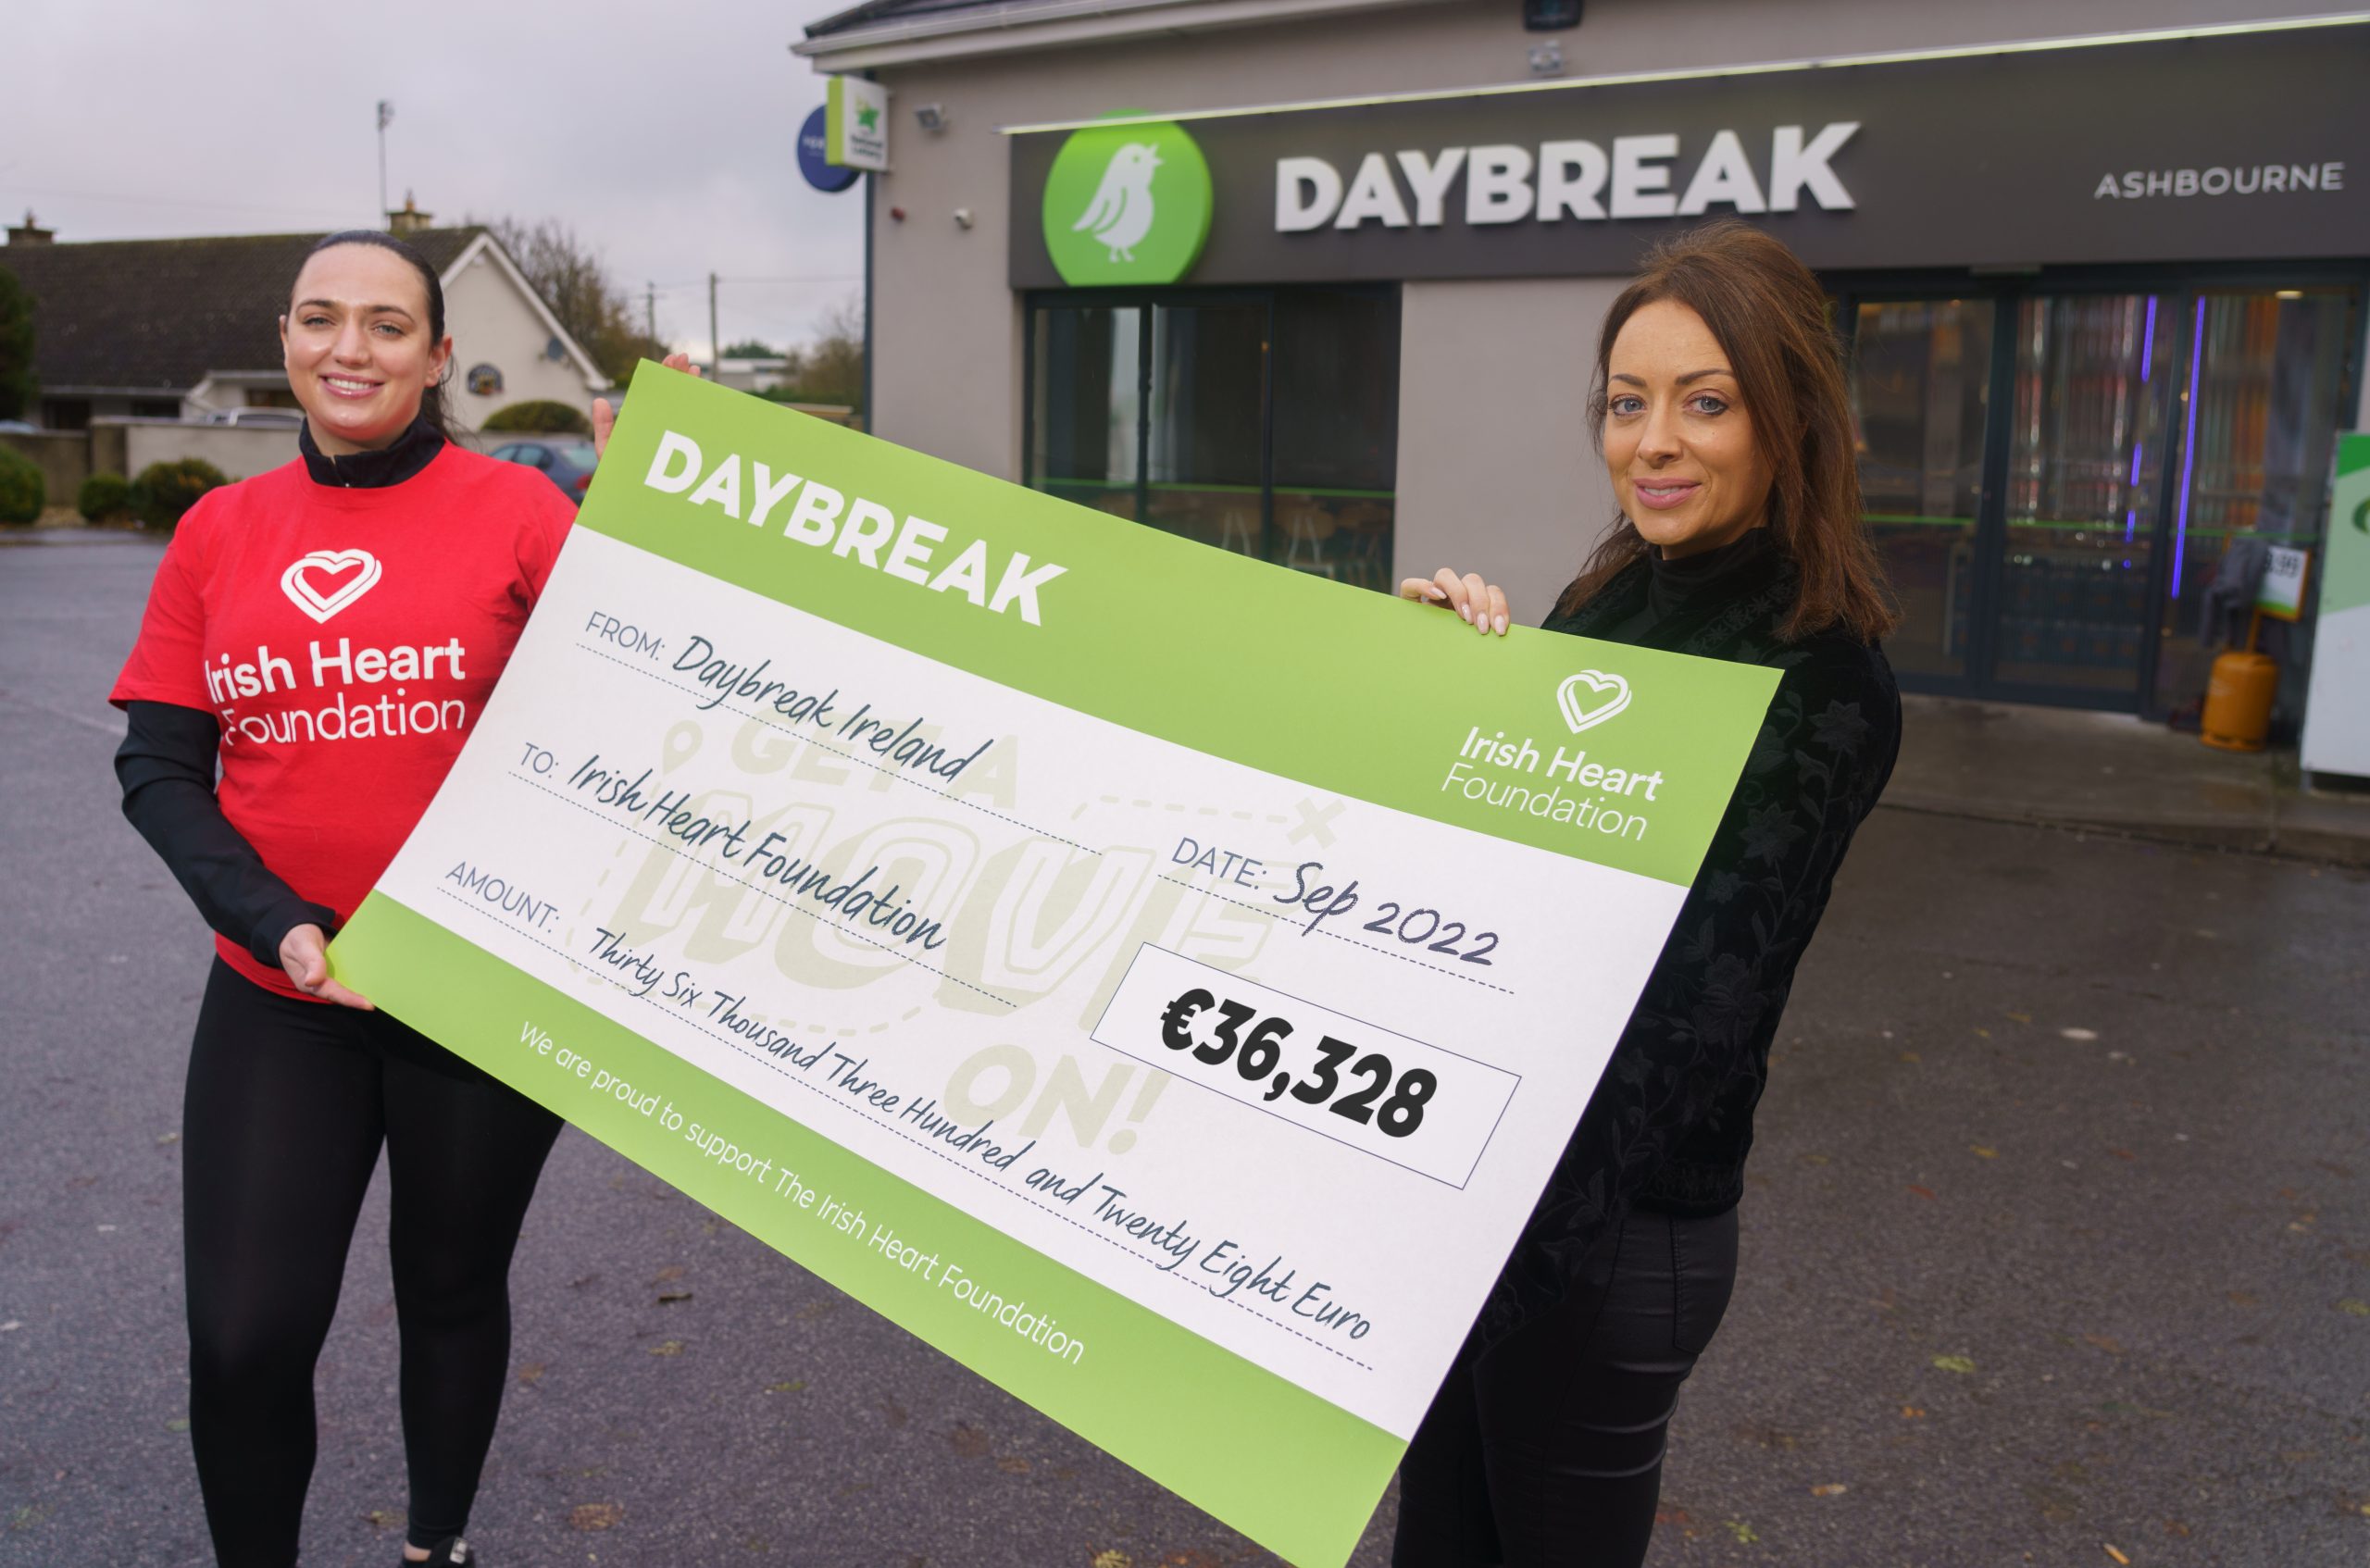 Daybreak Raises €36,328 for the Irish Heart Foundation with “Get a Move On!” challenge   